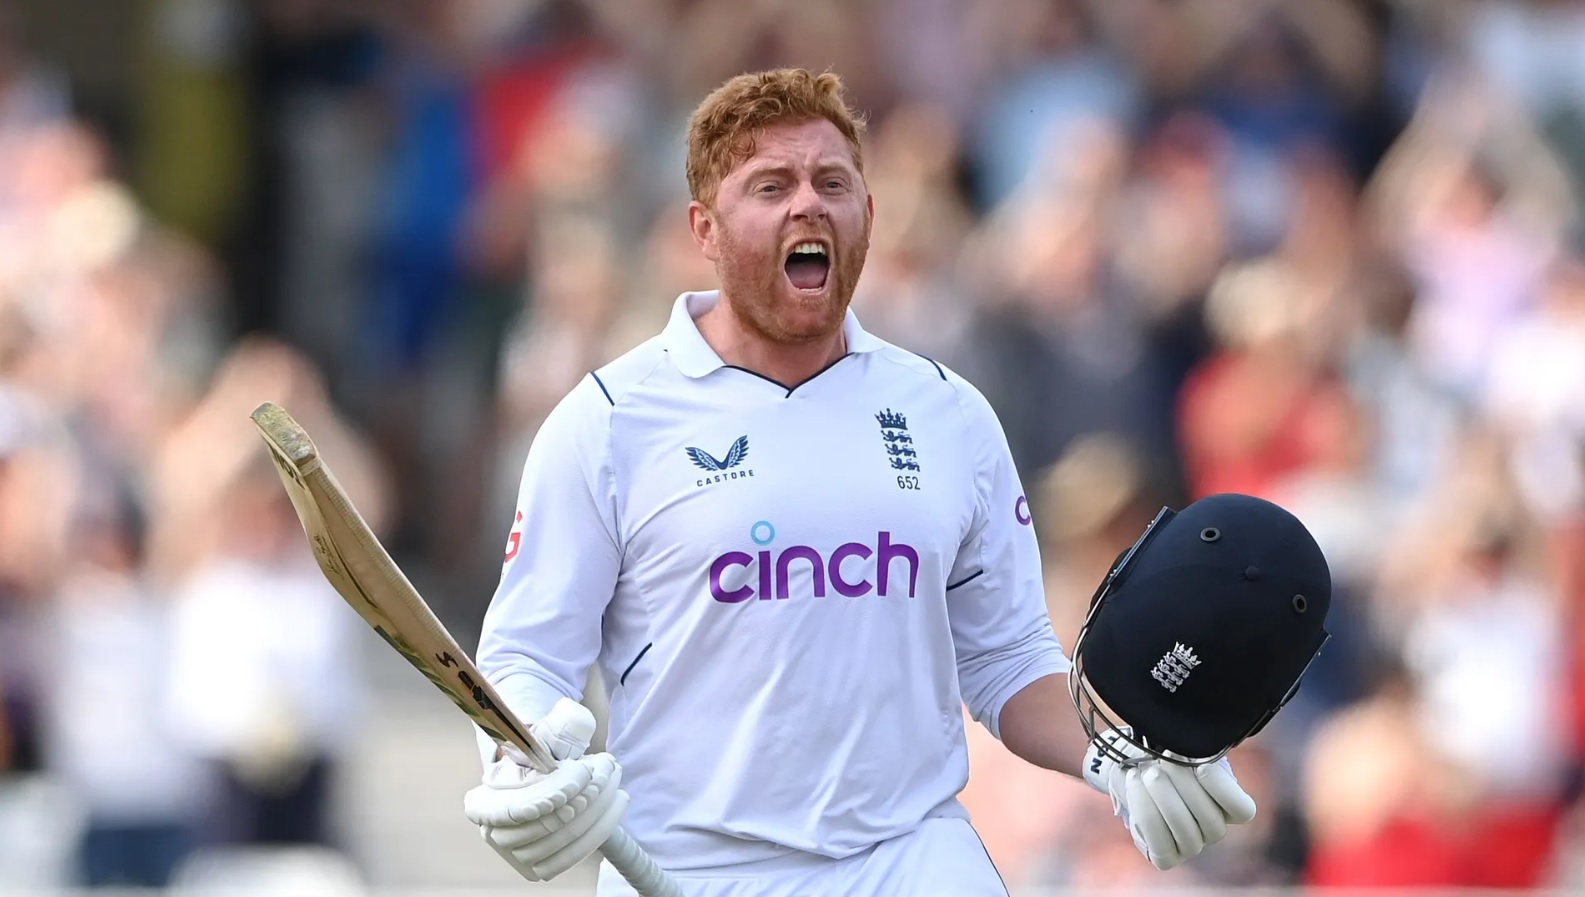 IND vs ENG 2022 | Jonny Bairstow going through hot streak that batters go once or twice in their career, reckons Michael Vaughan 